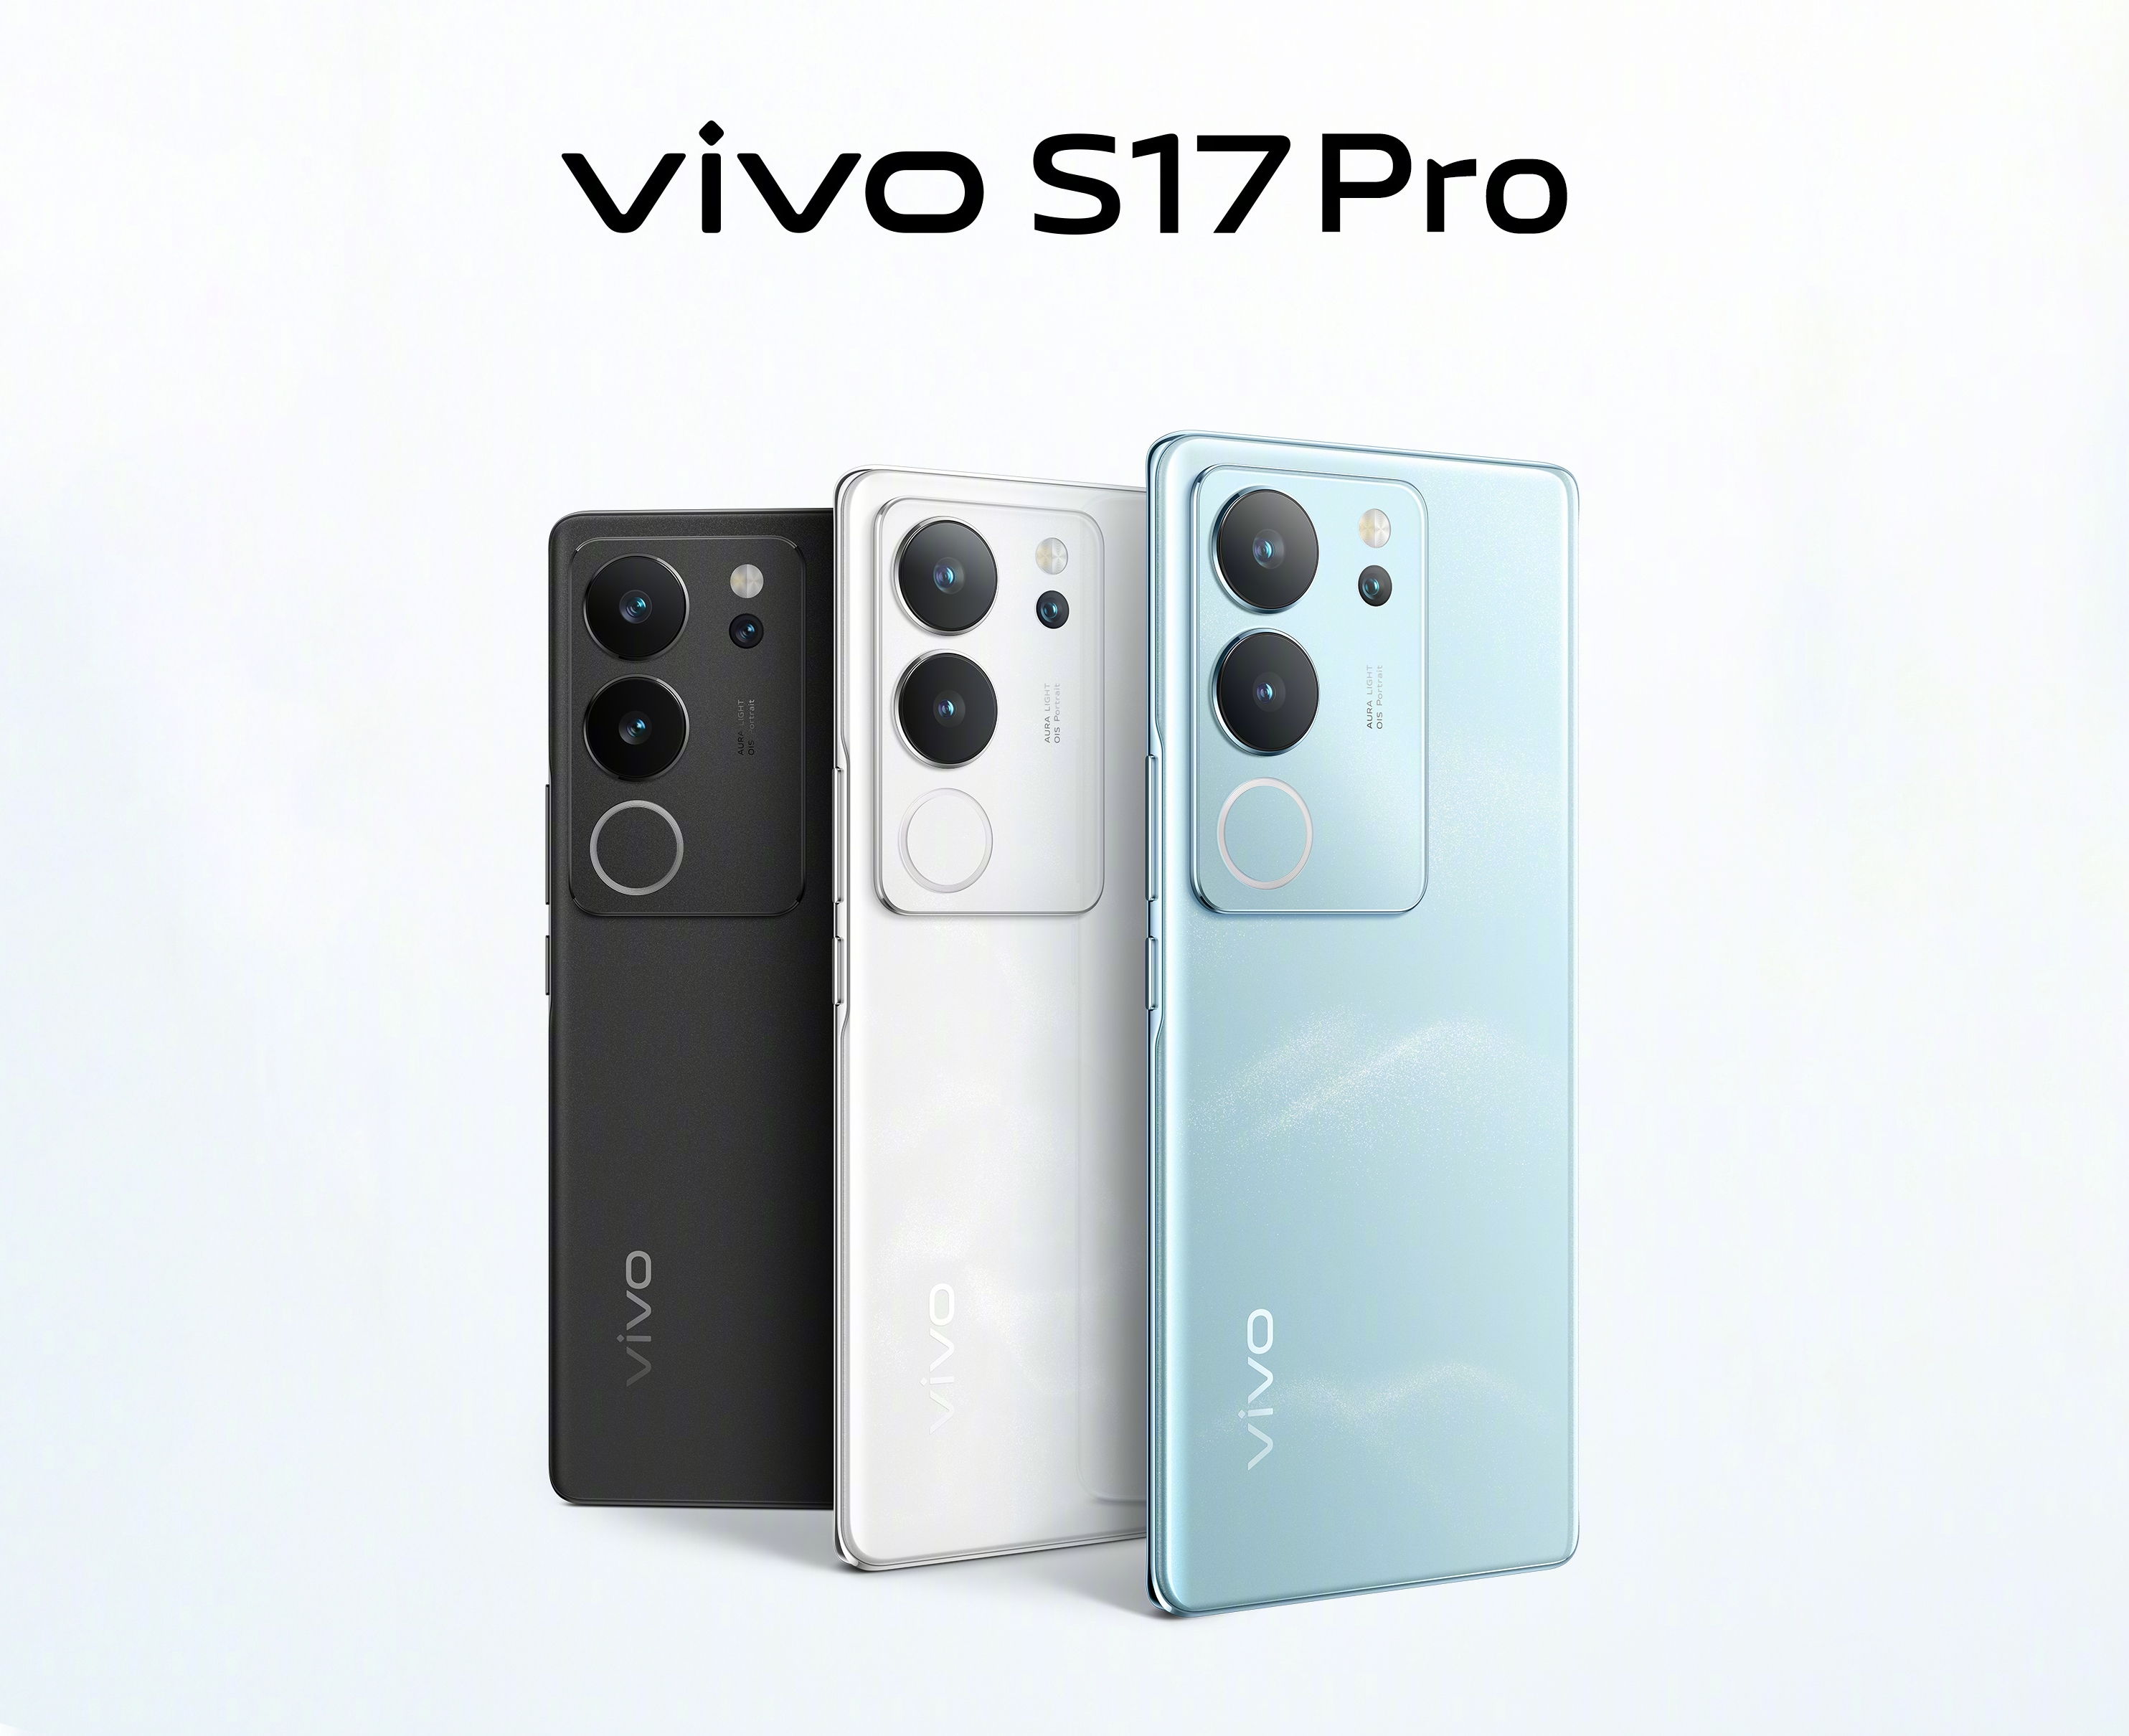 vivo S17 Pro: 120Hz OLED display, Dimensity 8200 chip, 50MP triple camera and 80W charging for $435